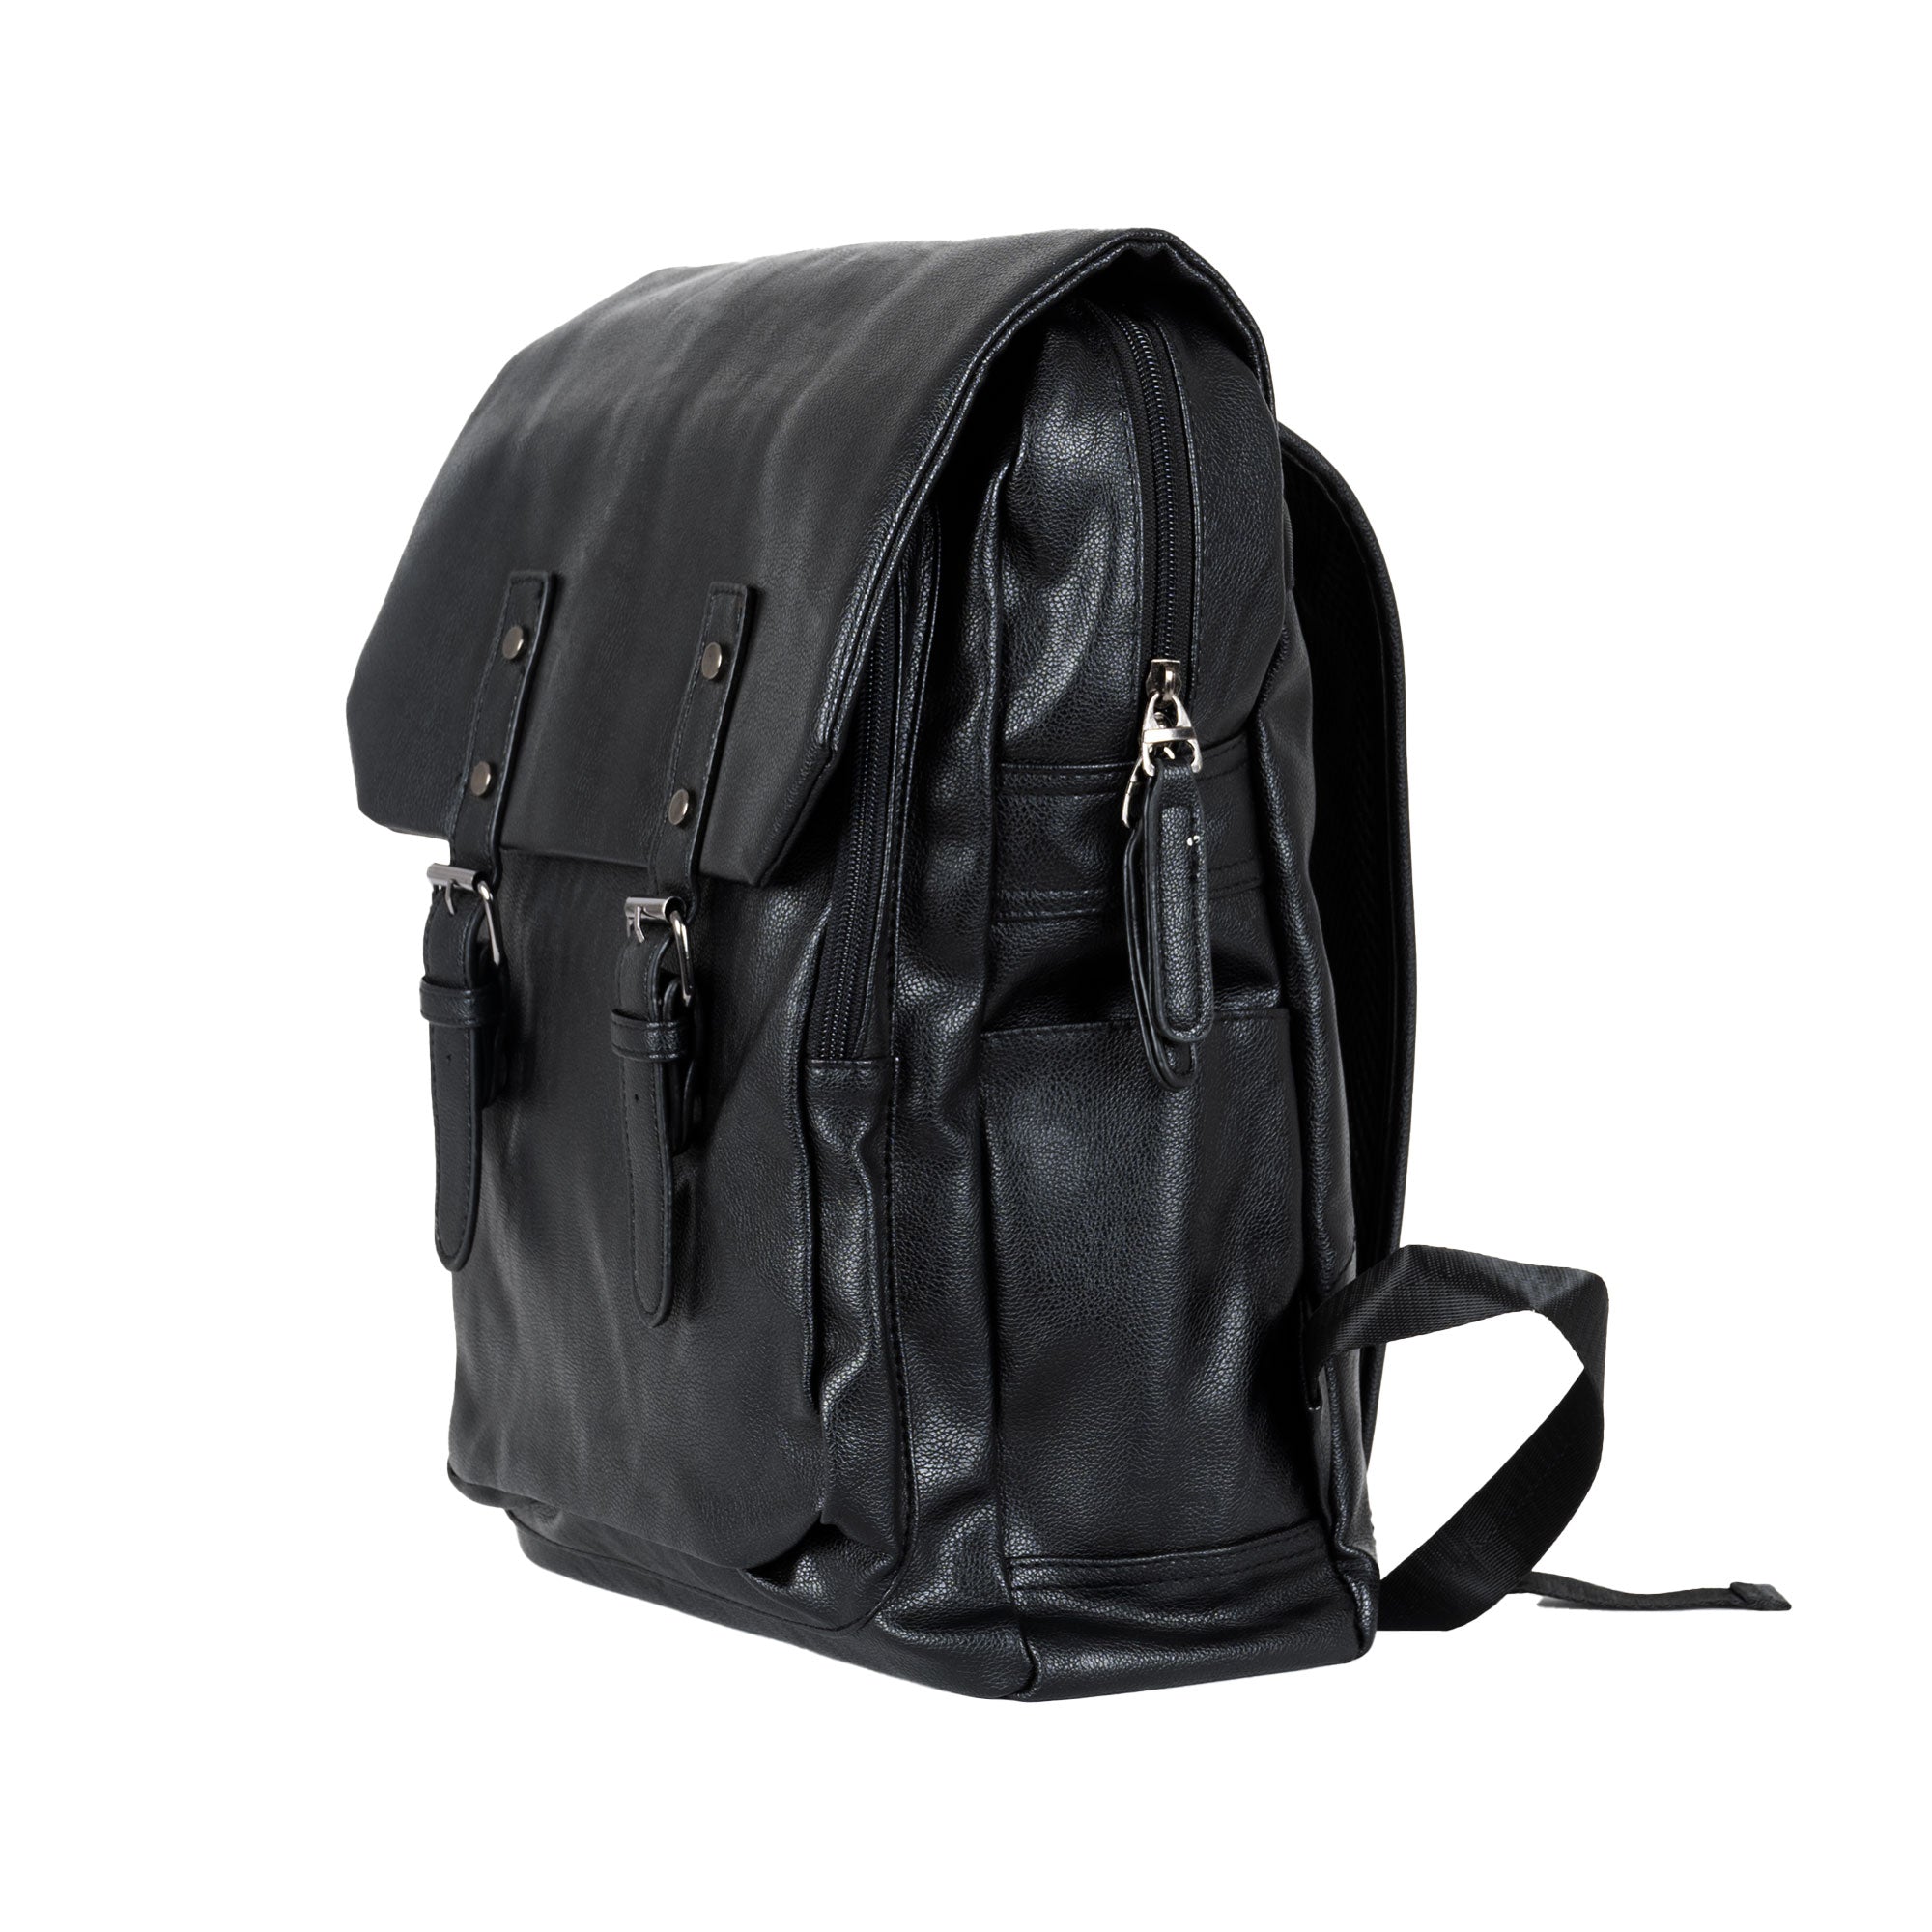 Unisex Casual Backpack Travel Bag